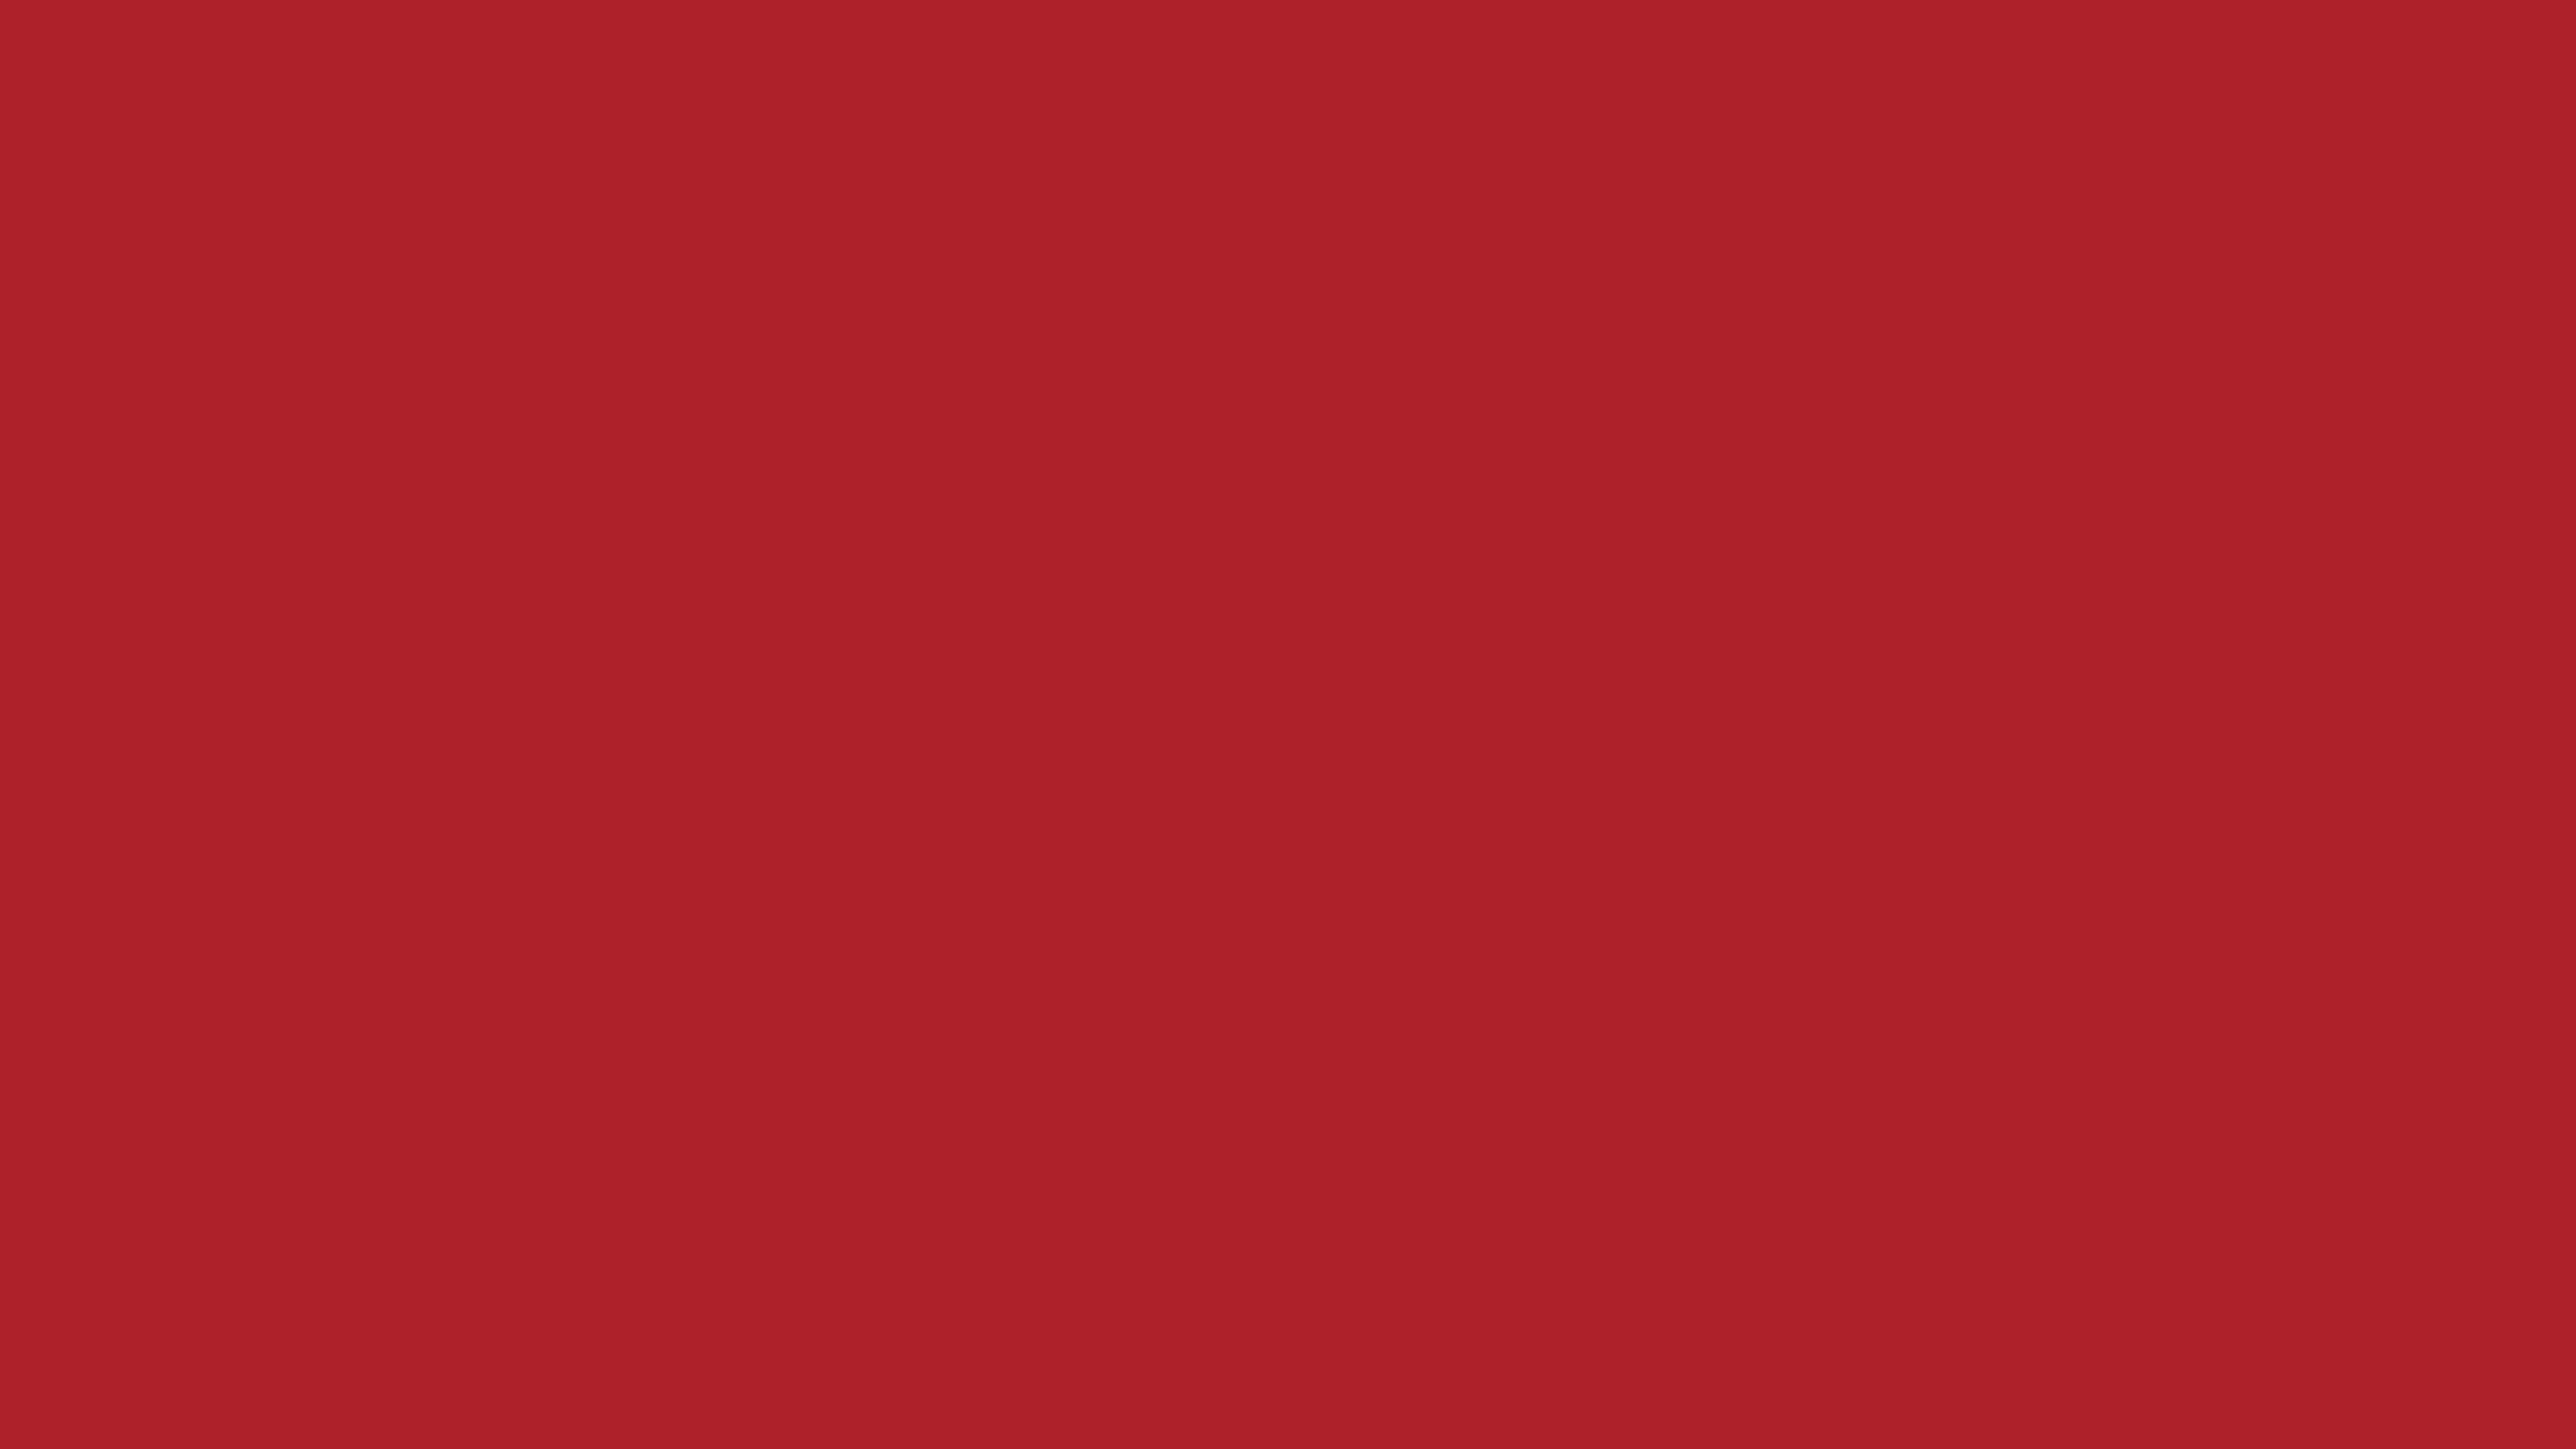 5120x2880 Upsdell Red Solid Color Background